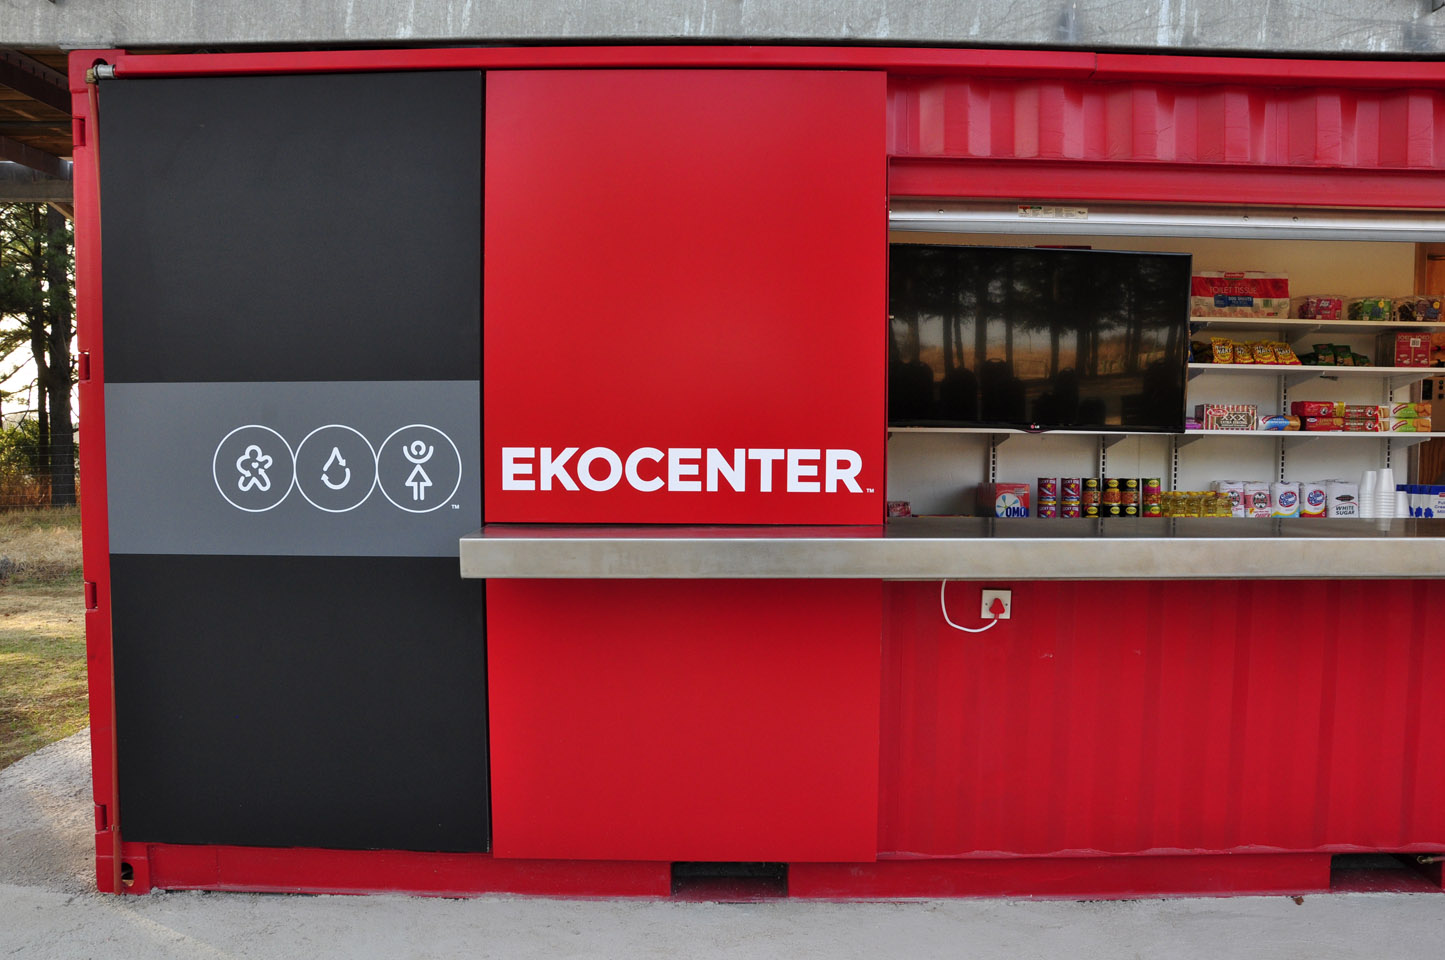 Coke’s ‘Downtown In A Box’ Delivers Clean Water And Wi-Fi To Africa